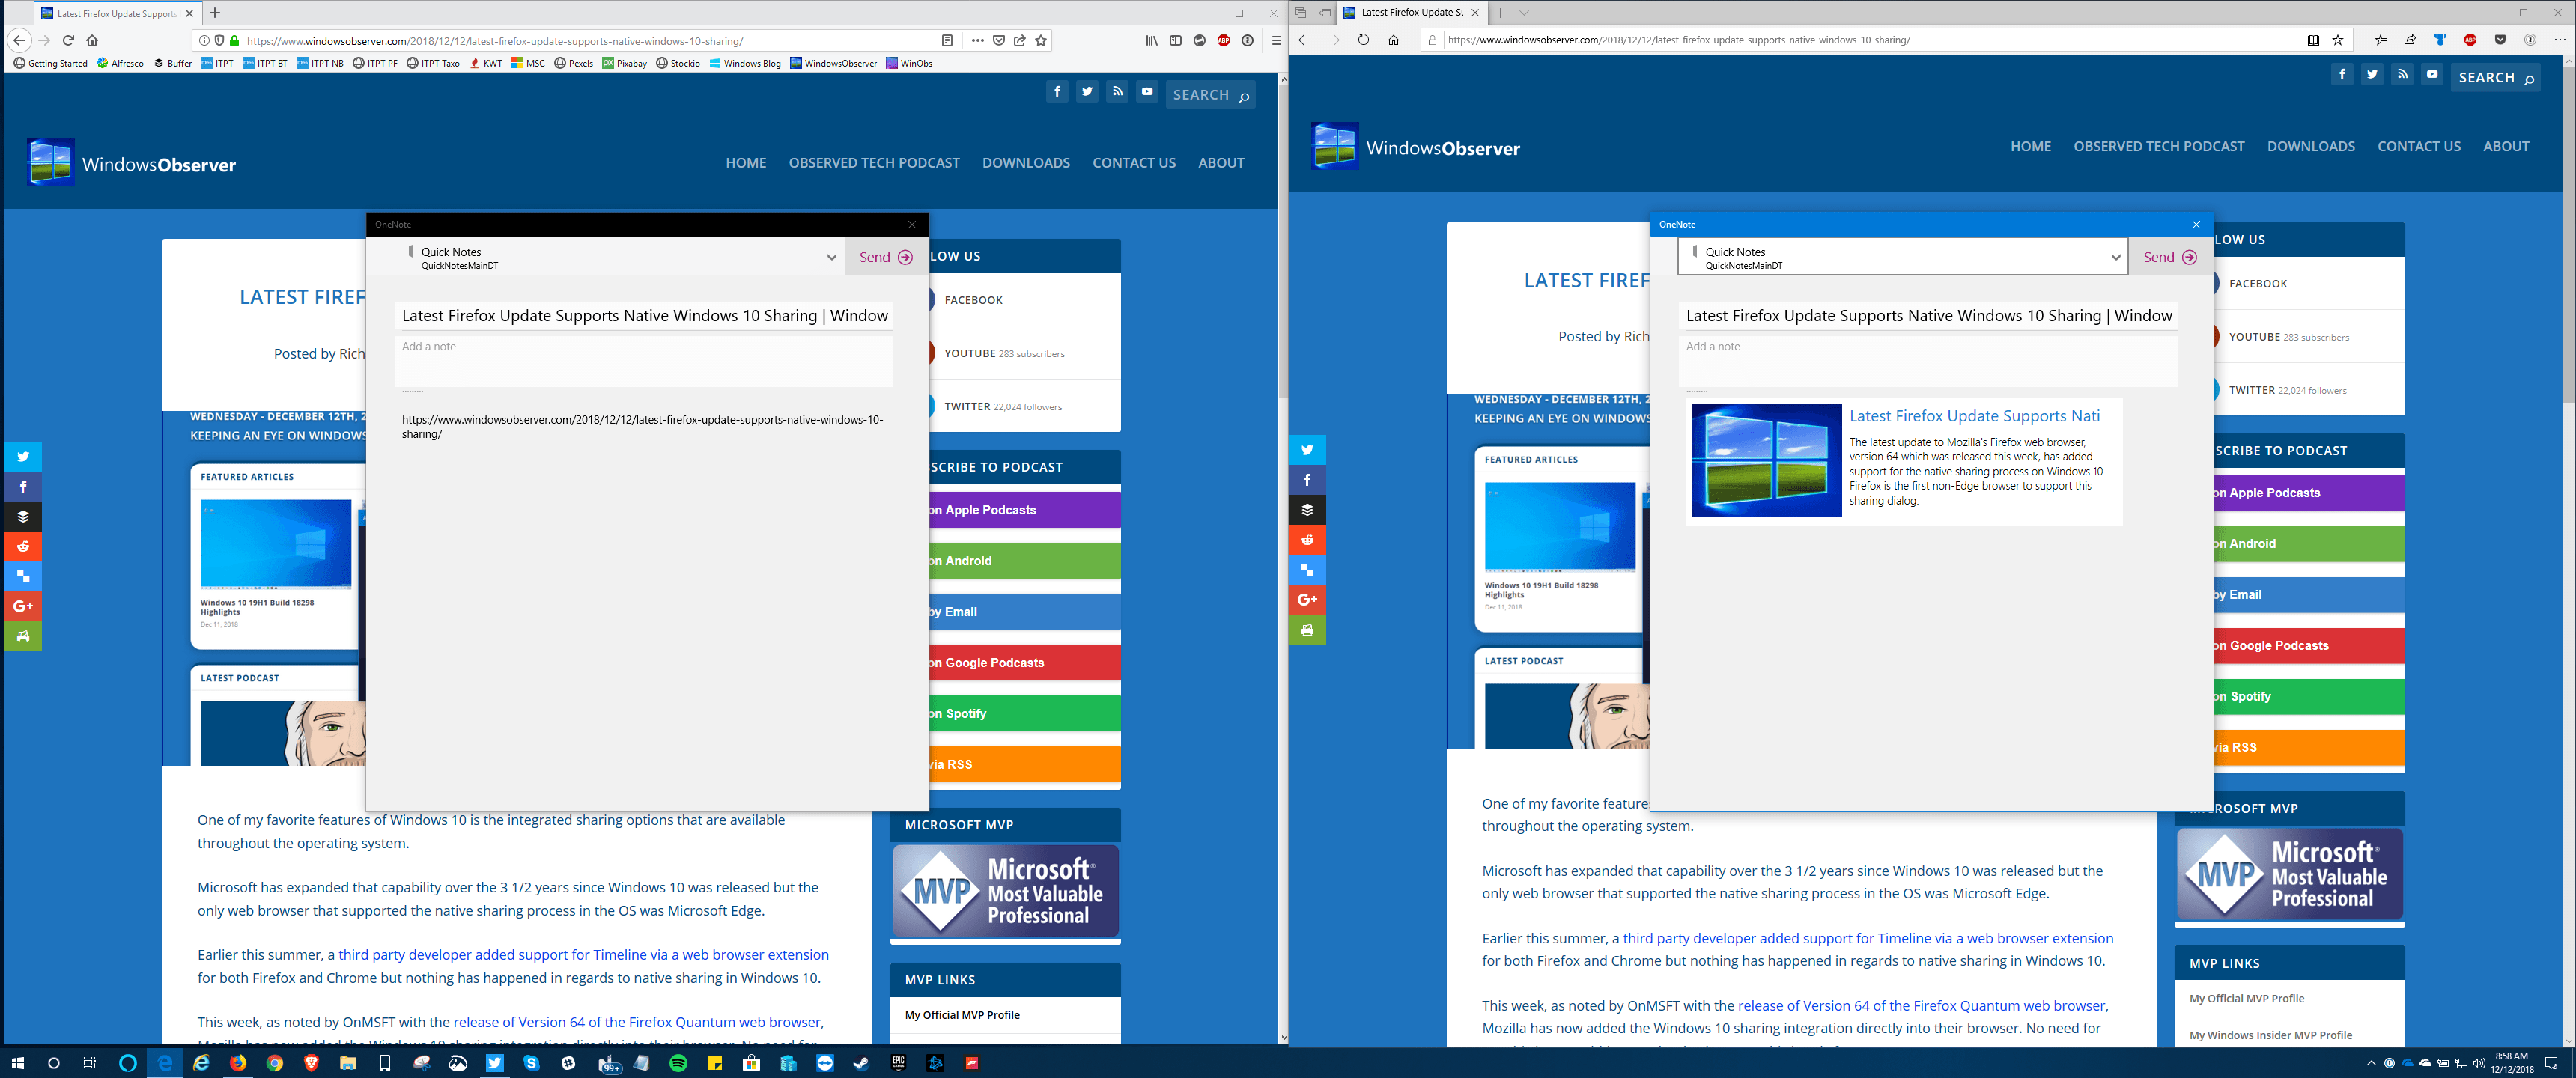 Sharing Comparisons Between Firefox and Edge